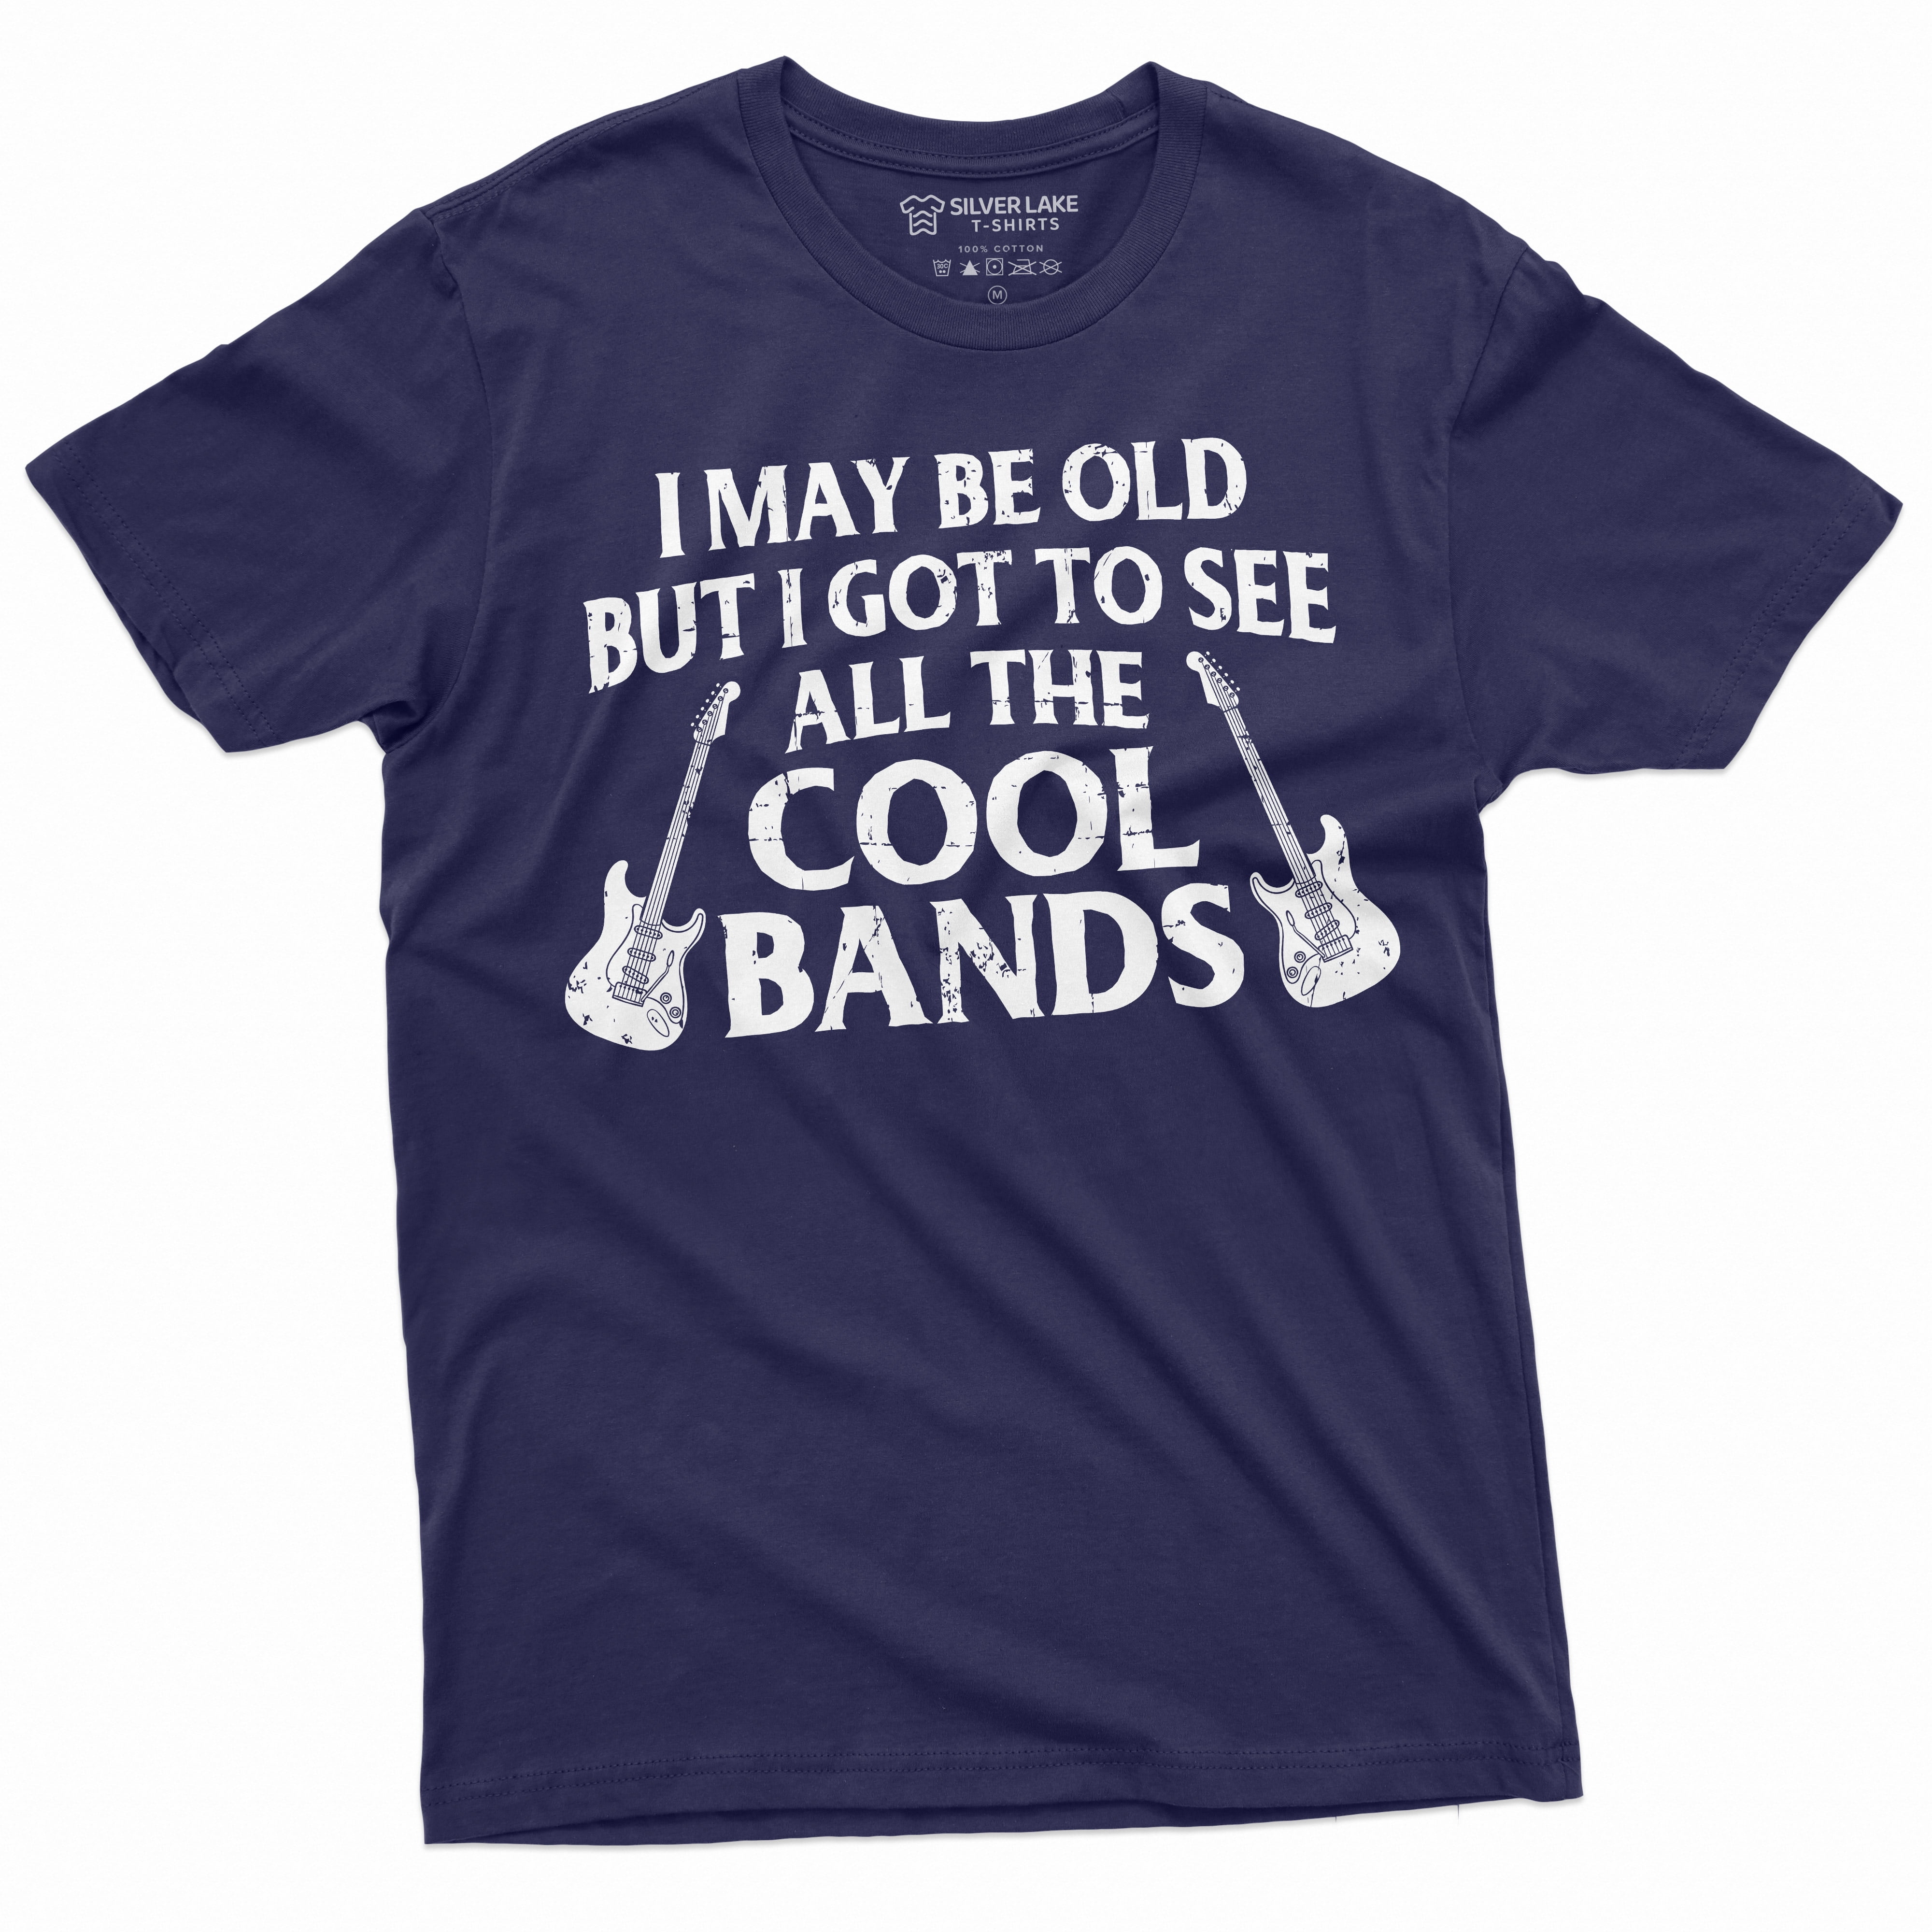 Old Navy 90s T-Shirts for Men